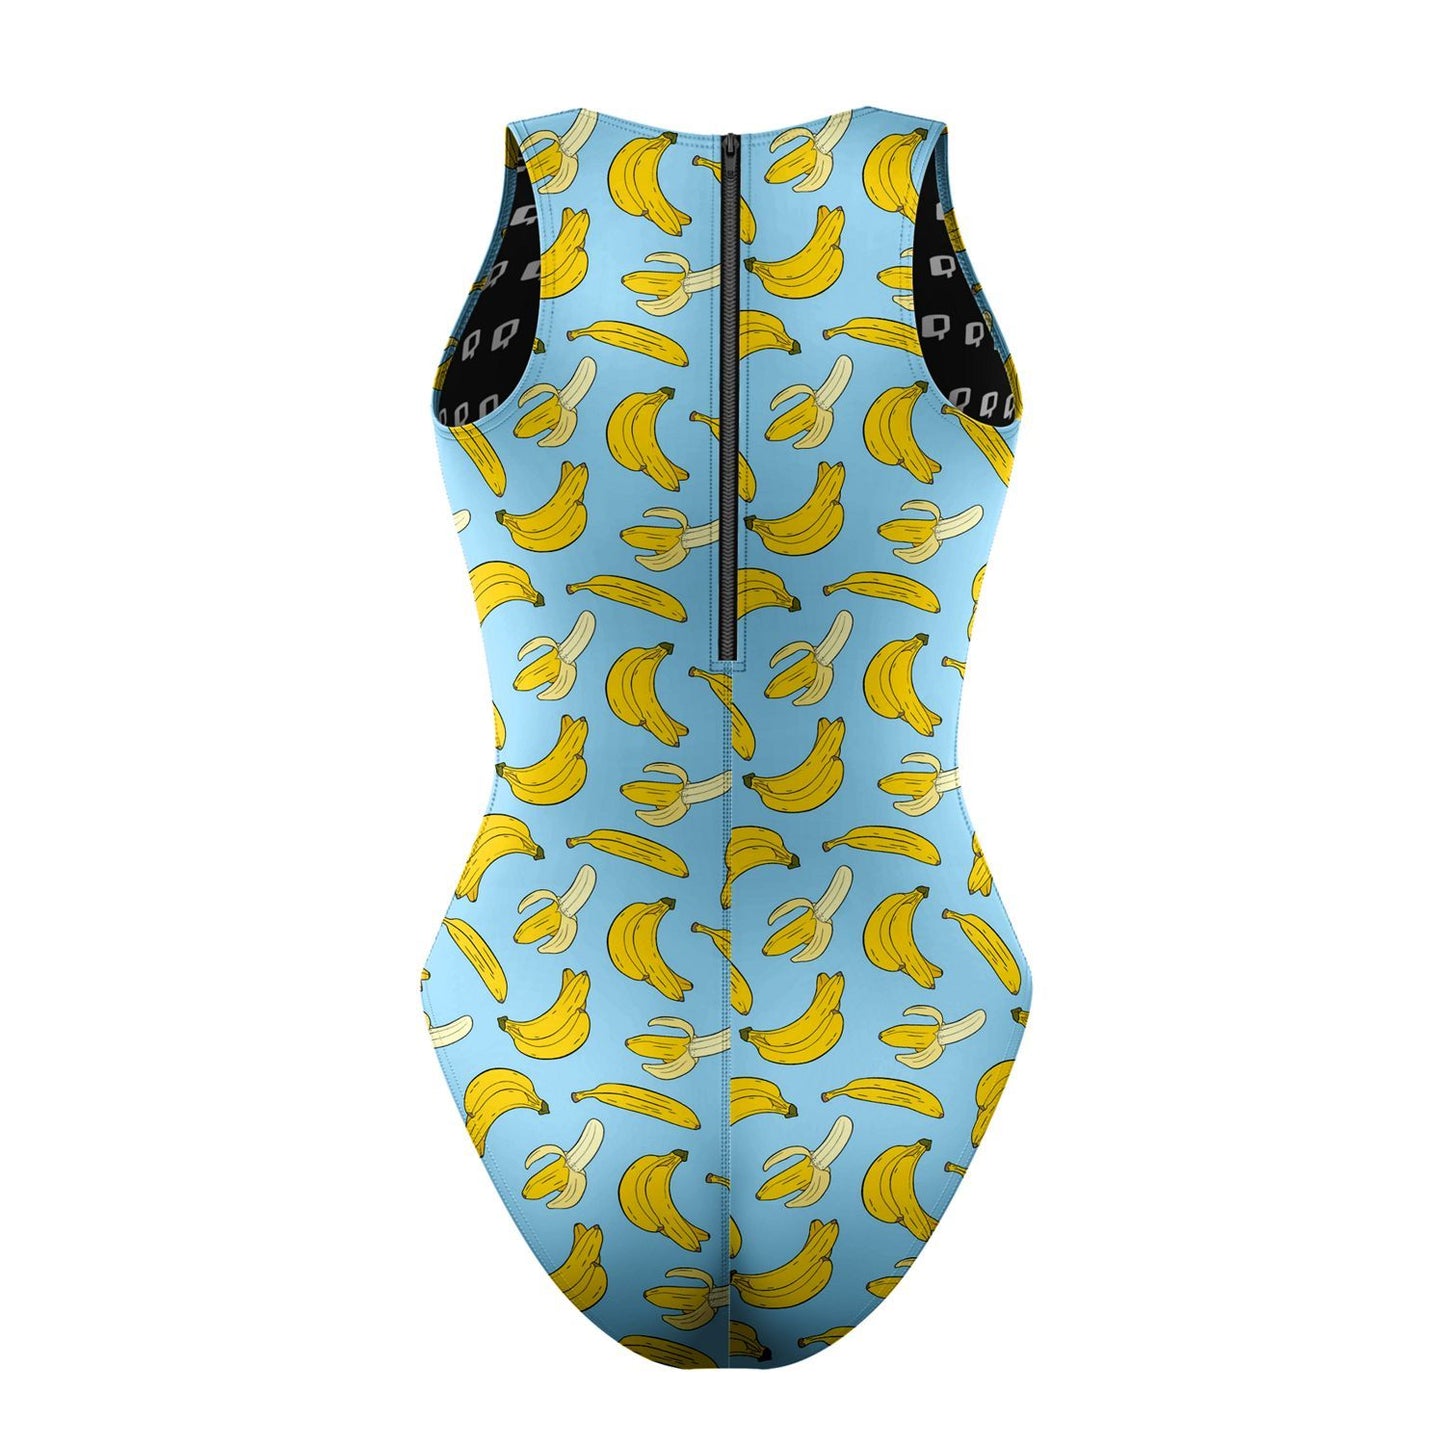 This Suit is Bananas Waterpolo